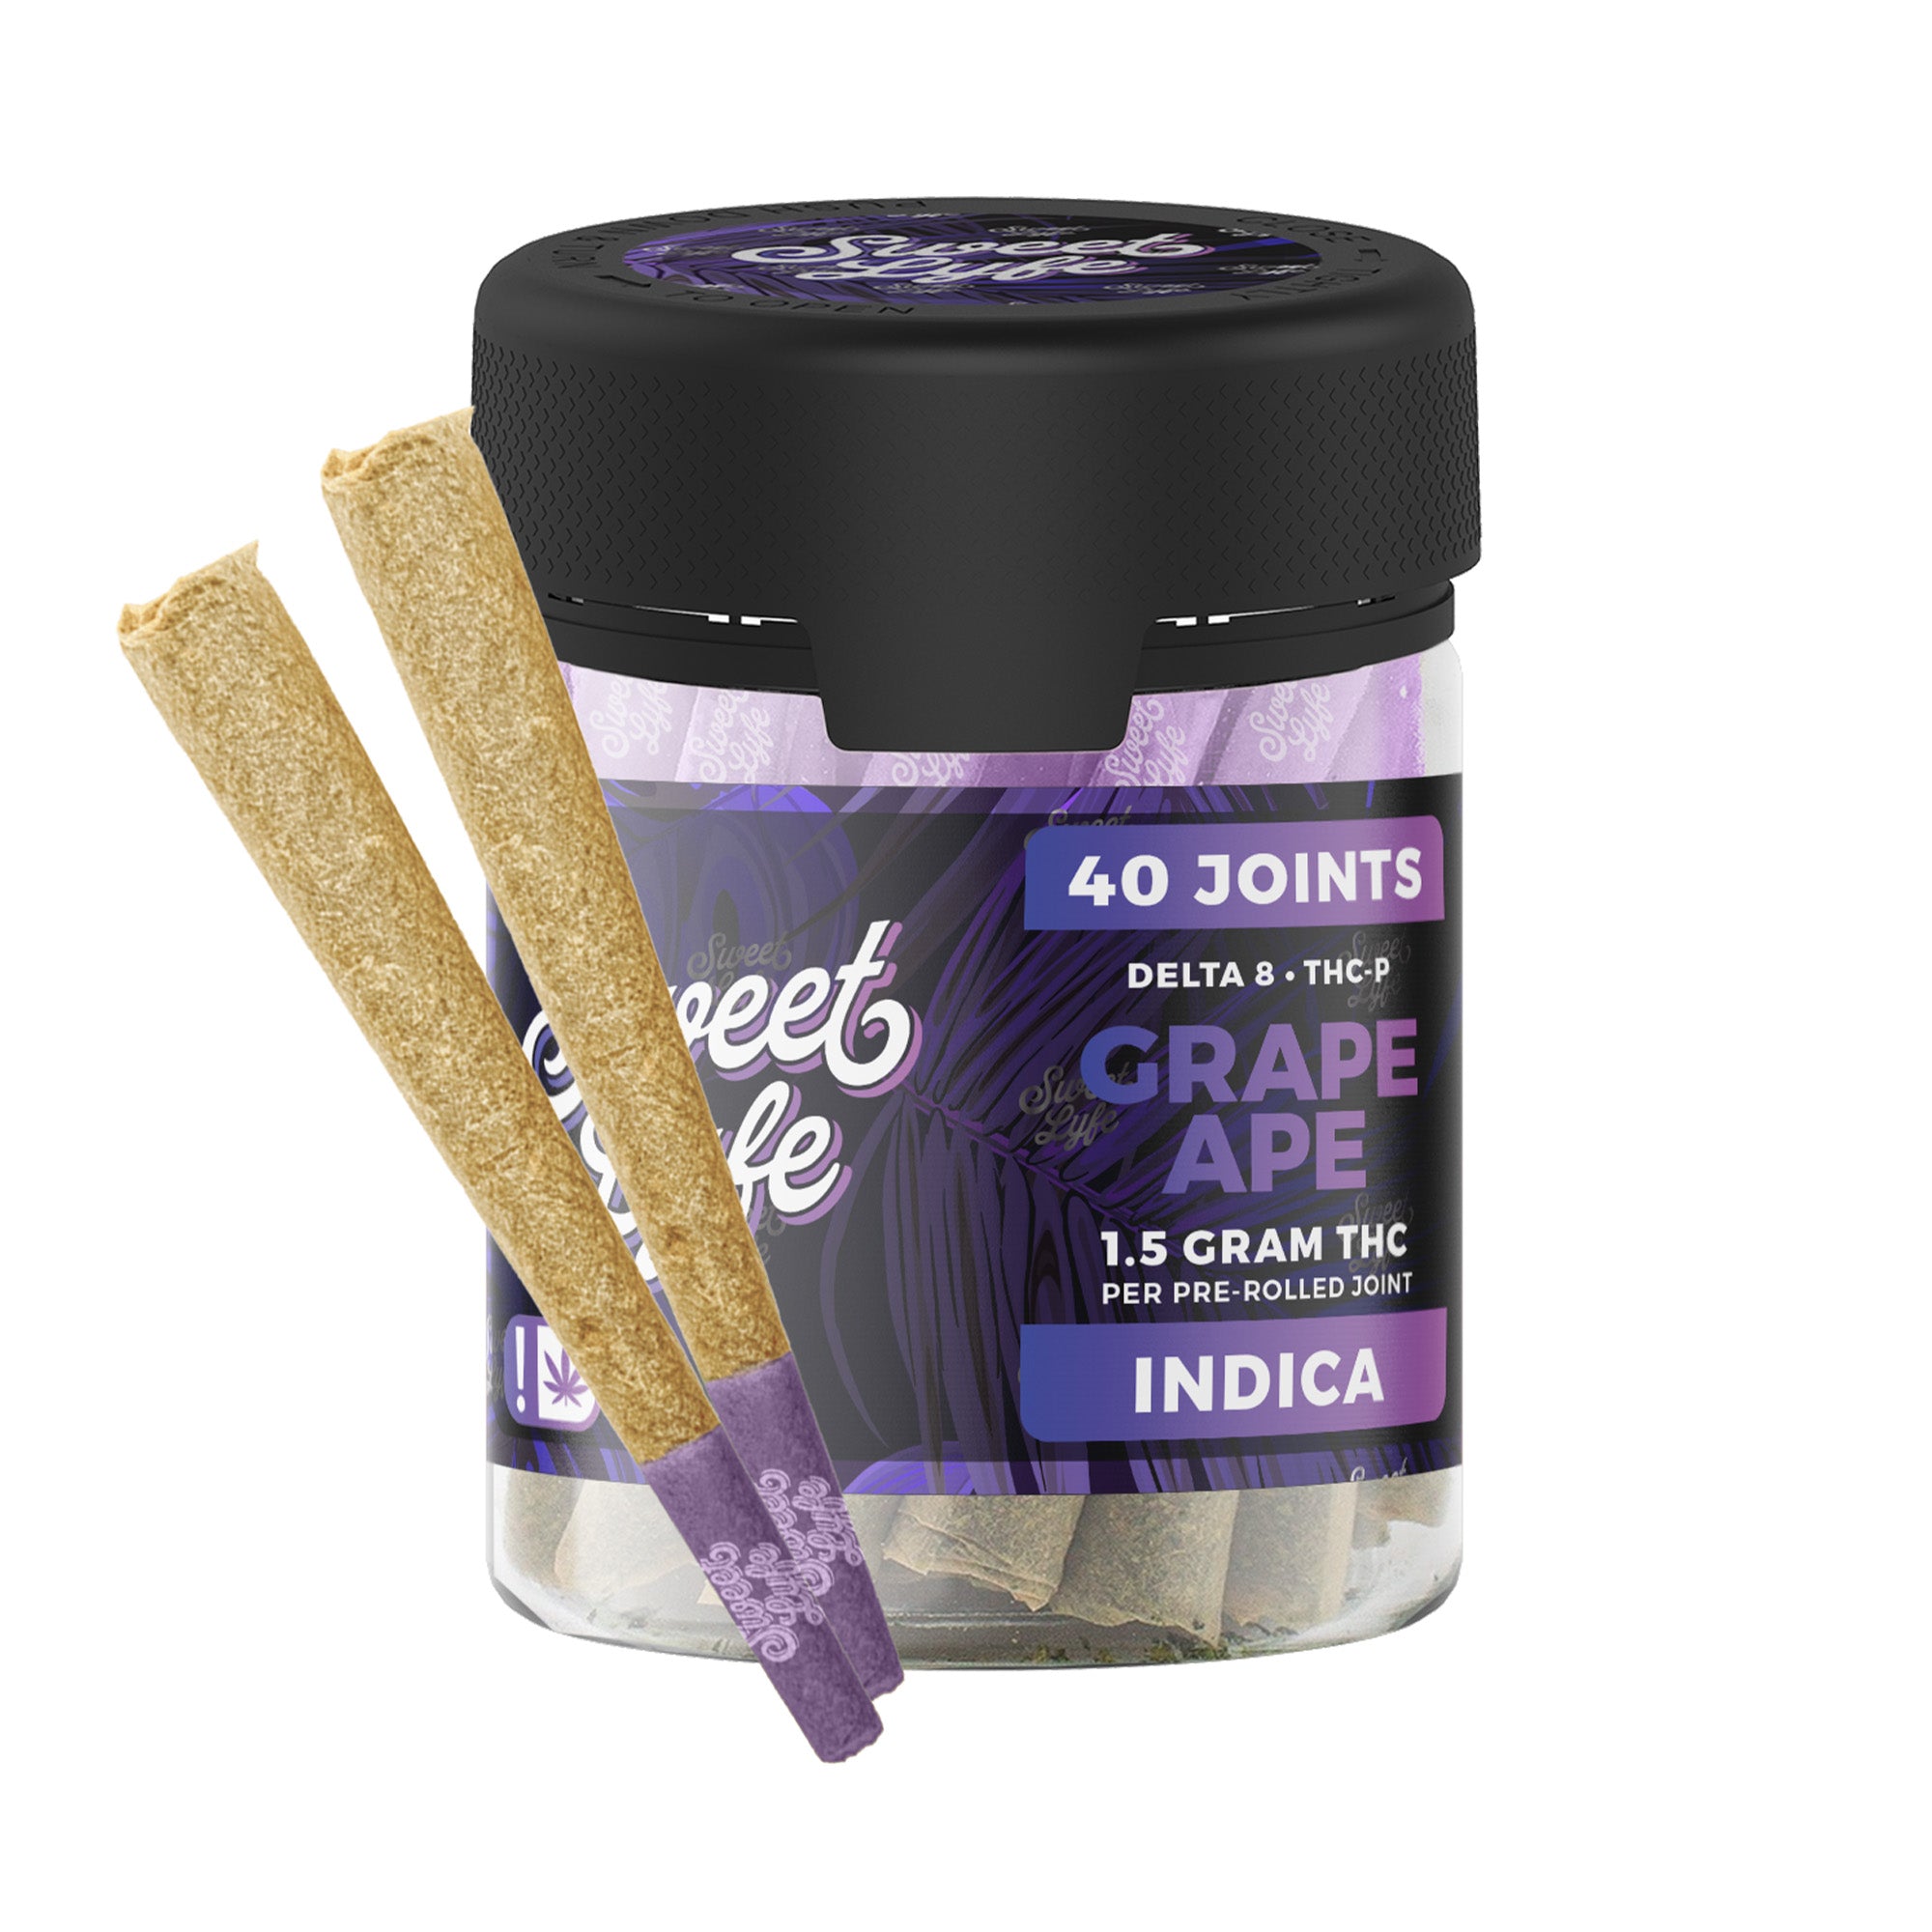 40 Pack of Joints D8+THCP  - 1.5g per Joint - Grape Ape - Indica